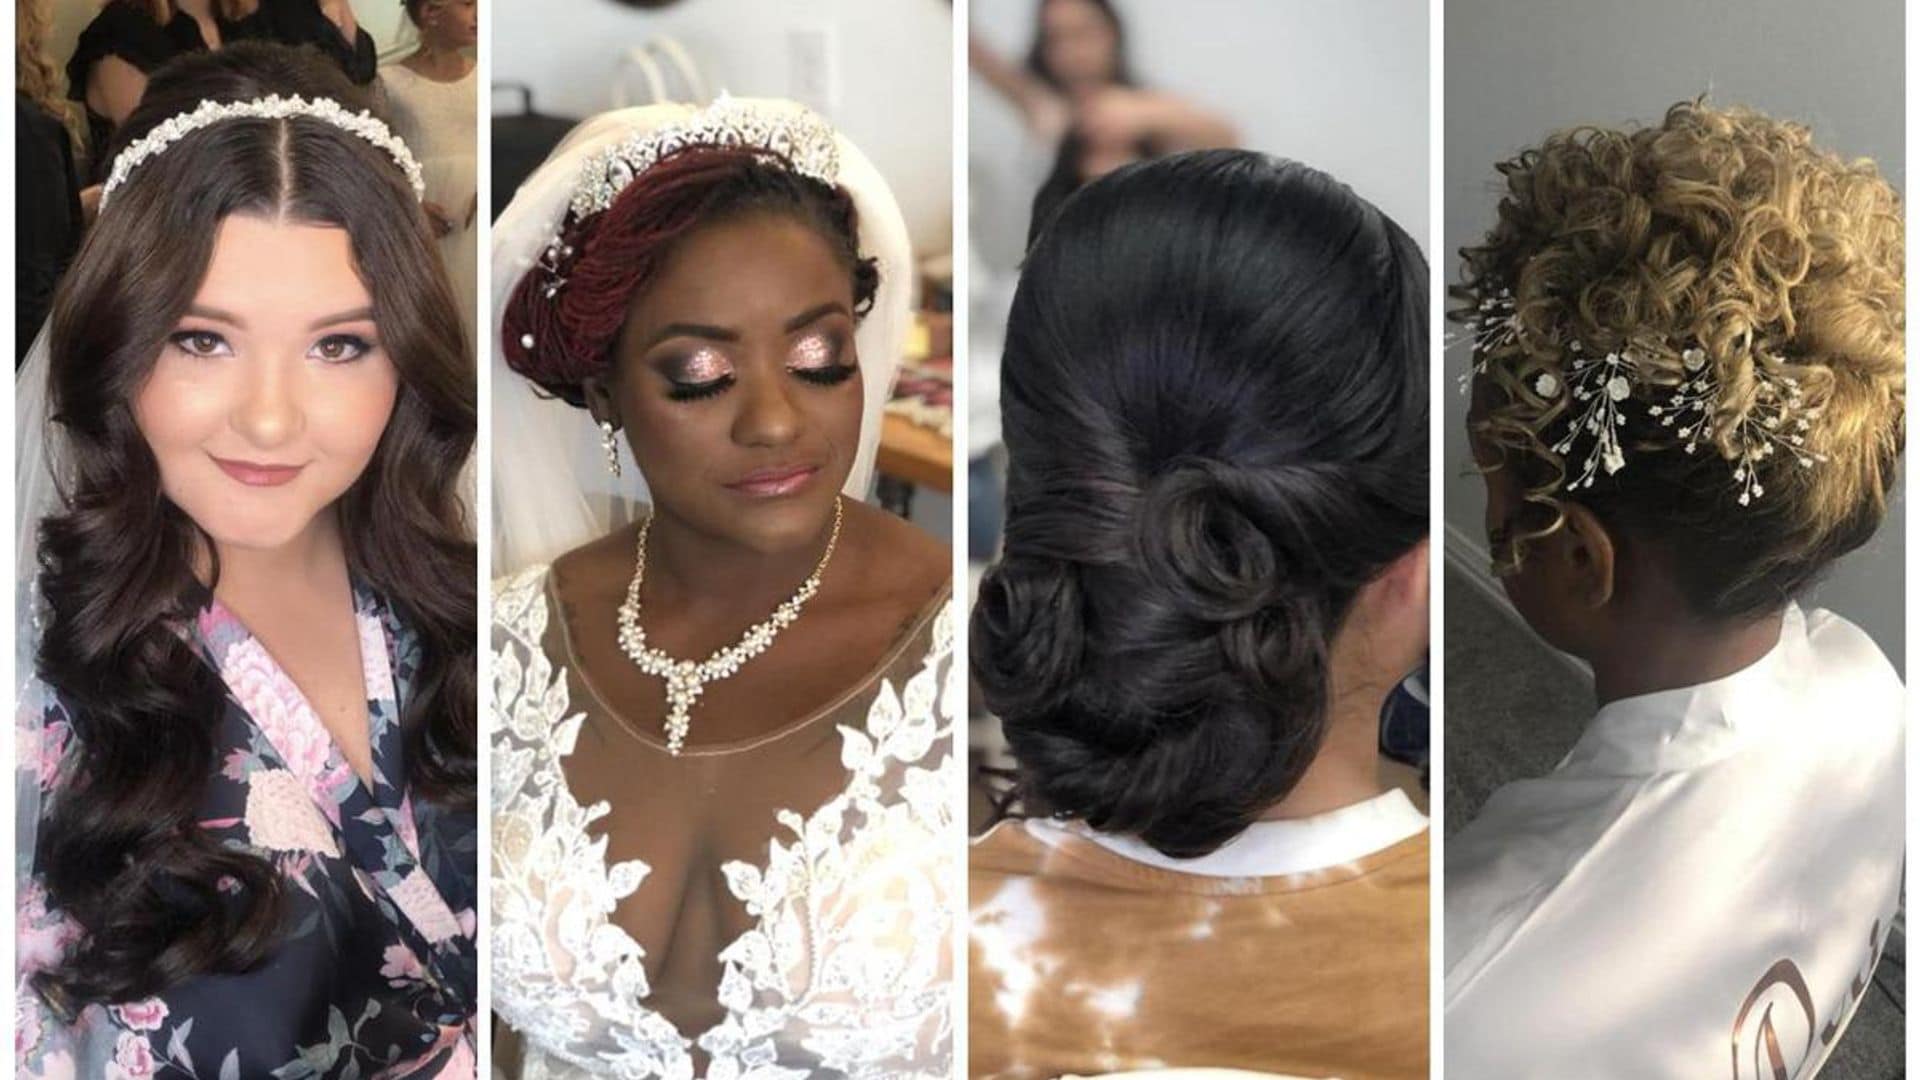 From retro Hollywood waves to neutral eyes with very fluffy full lashes: 2022 wedding hair and makeup trends